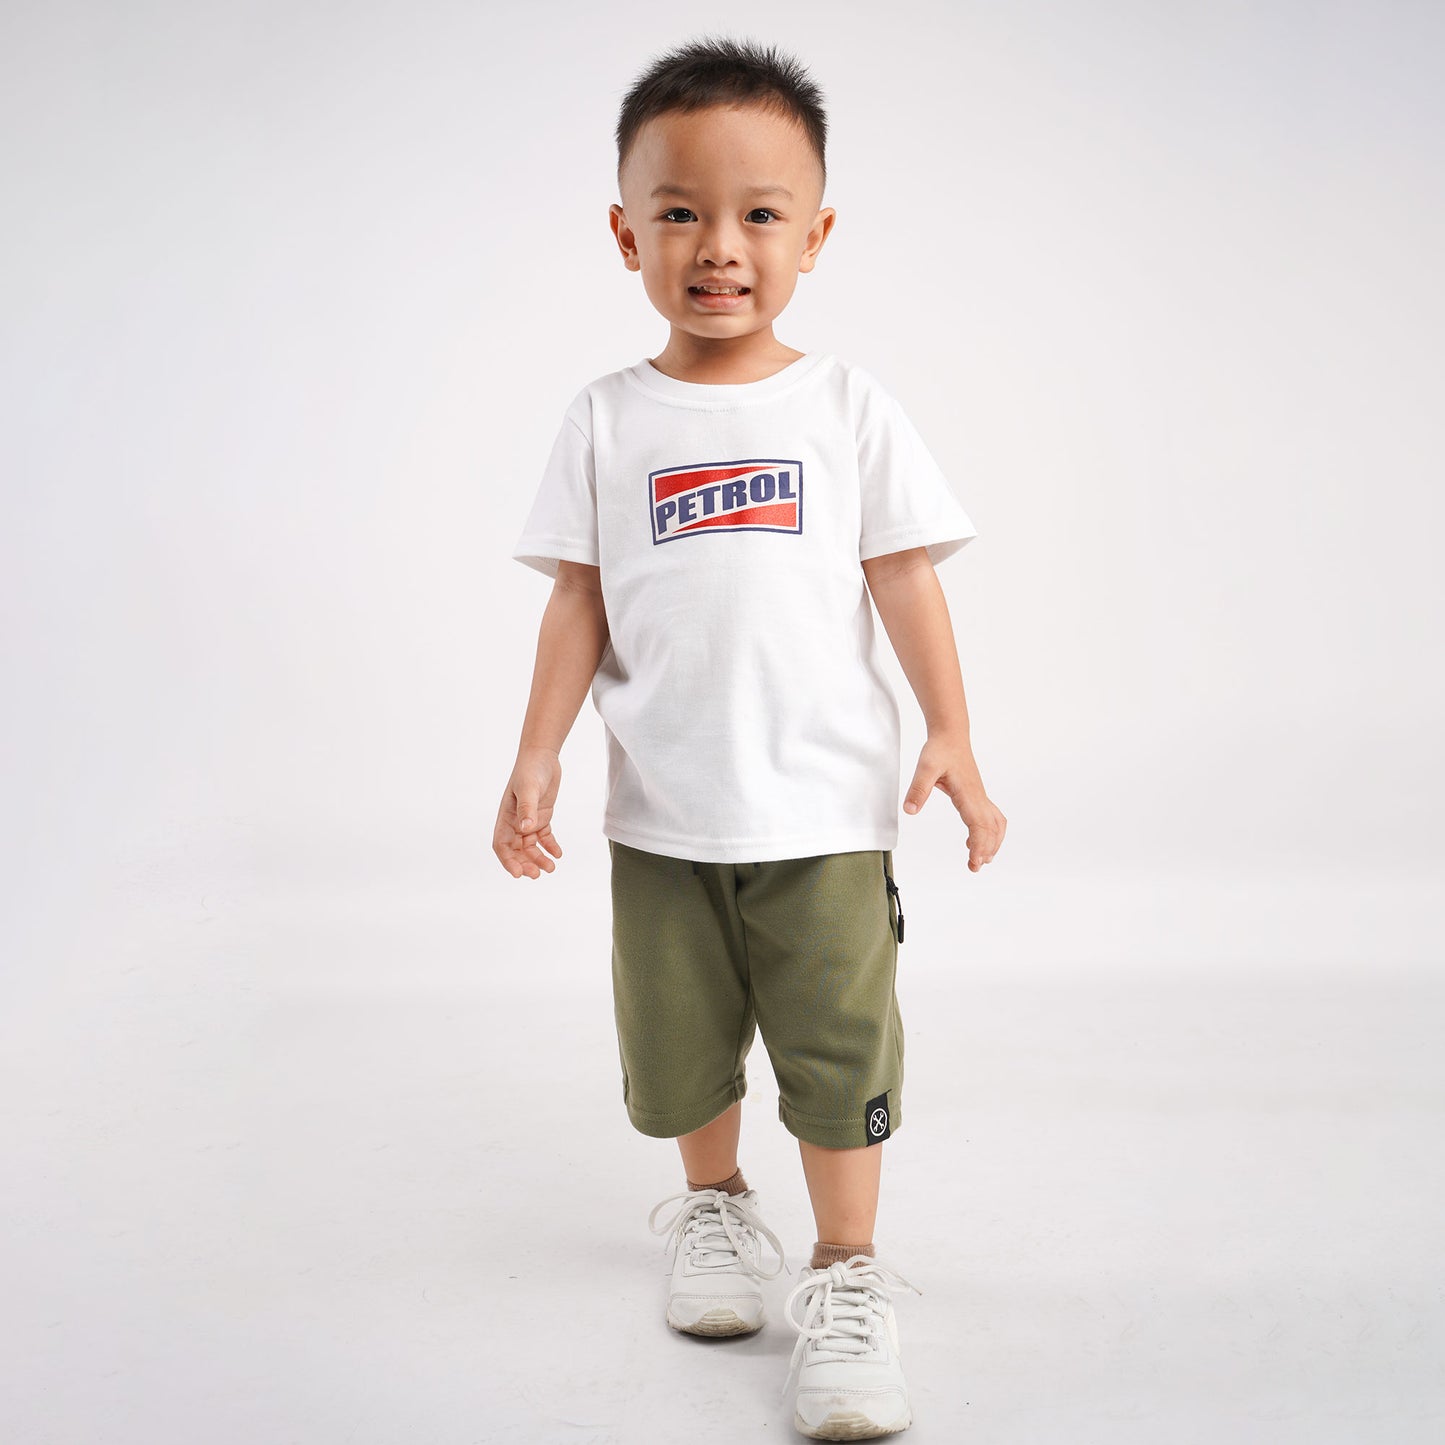 Petrol Kids Wear Basic Non-Denim Jogger shorts For Kids Trendy Fashion High Quality Apparel Comfortable Casual short For Kids 122171 (Green)